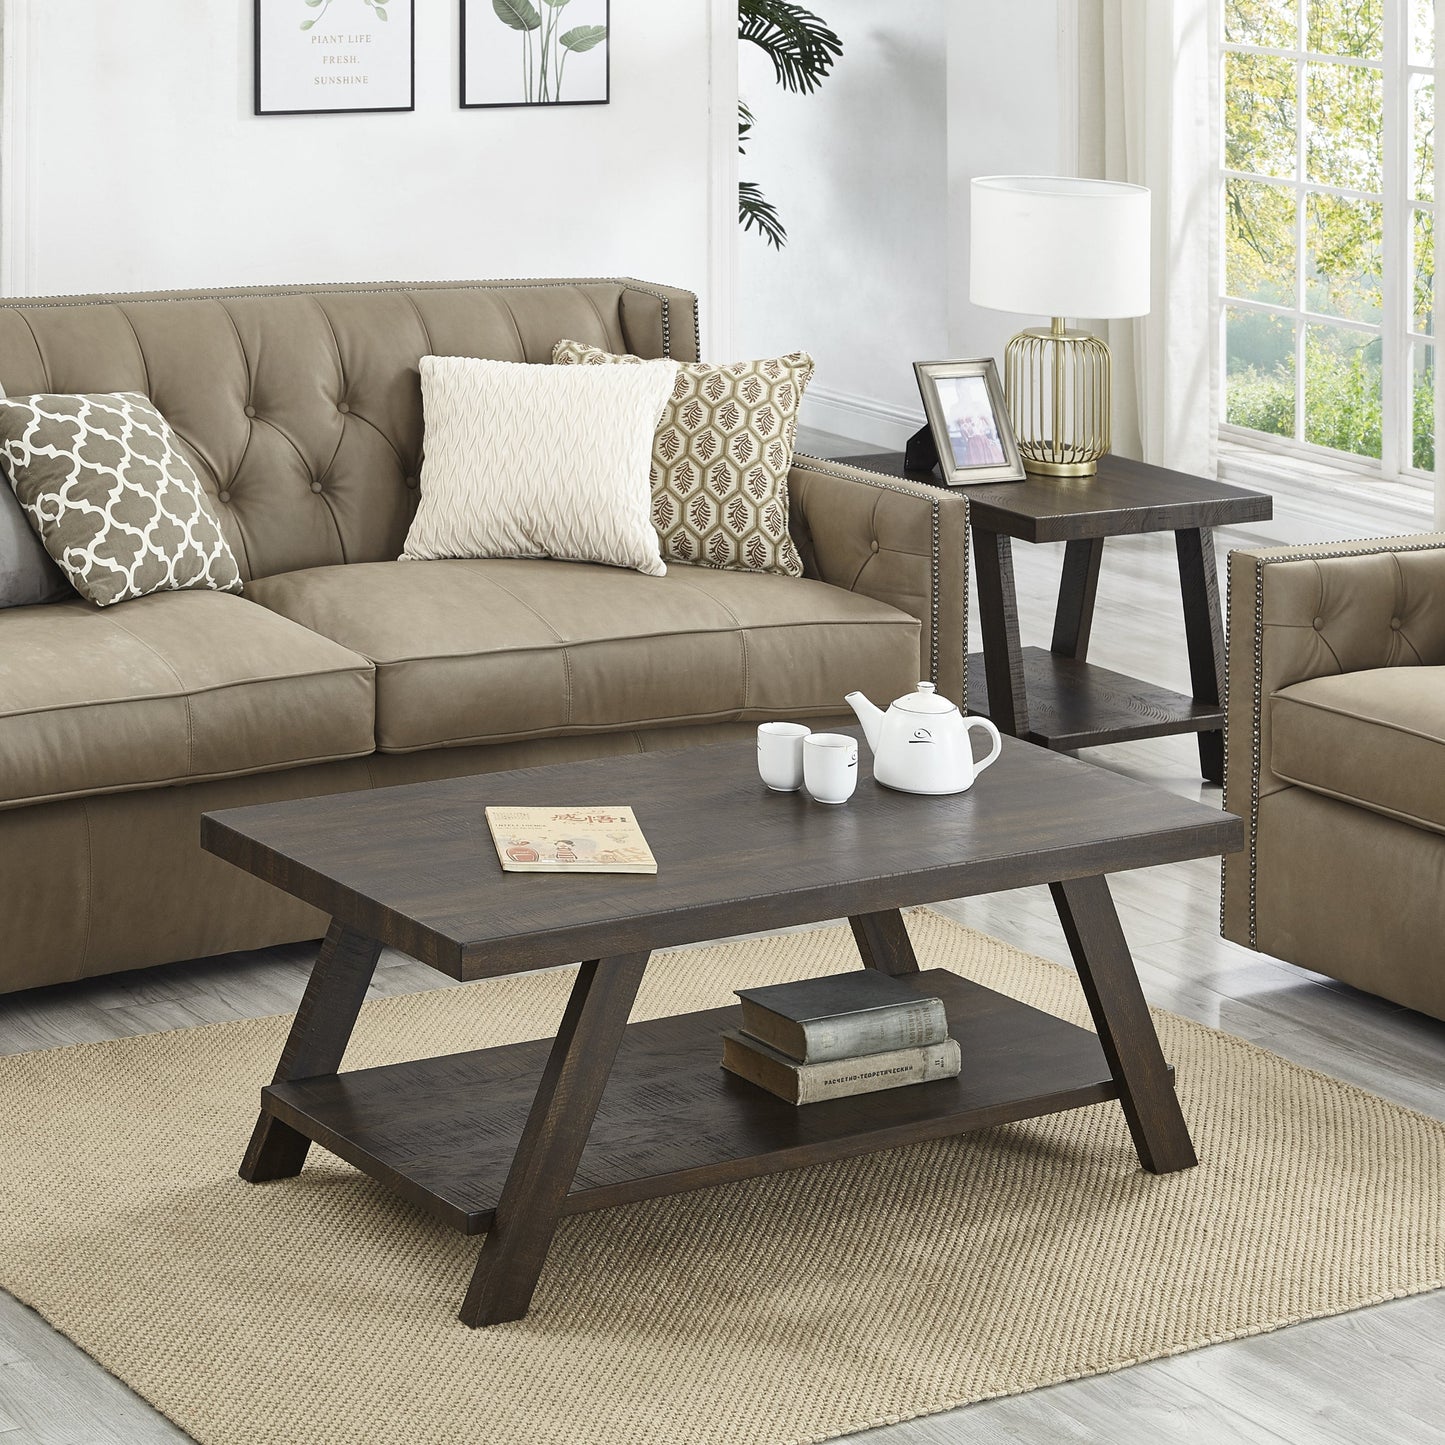 Athens Contemporary 3-Piece Wood Shelf Coffee Table Set in Weathered Espresso